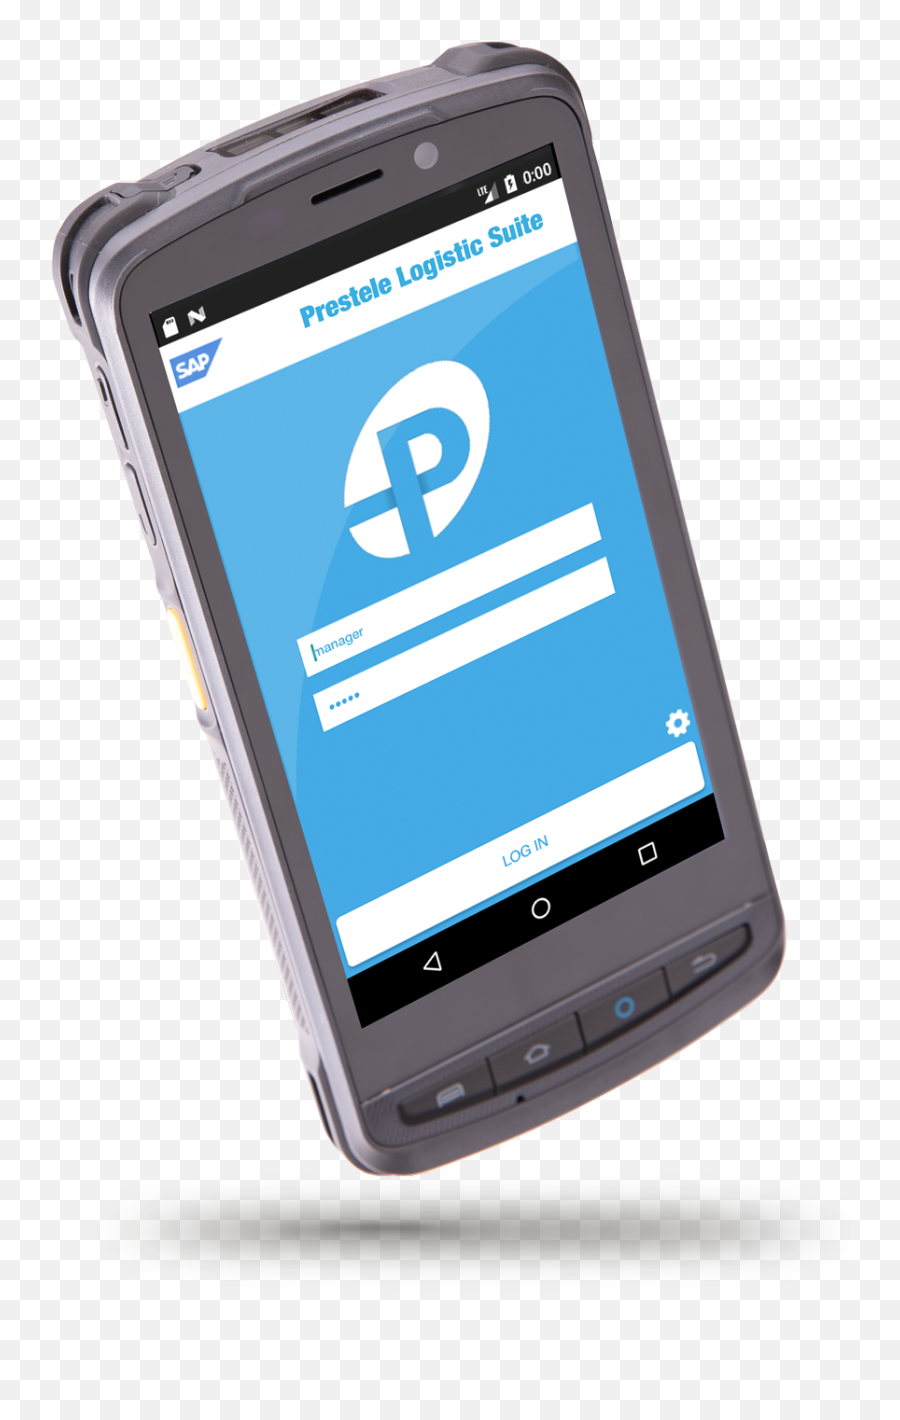 Prestele It Sap Businss One Barcode Scanner Integration - Technology Applications Png,Barcode Scanning Icon